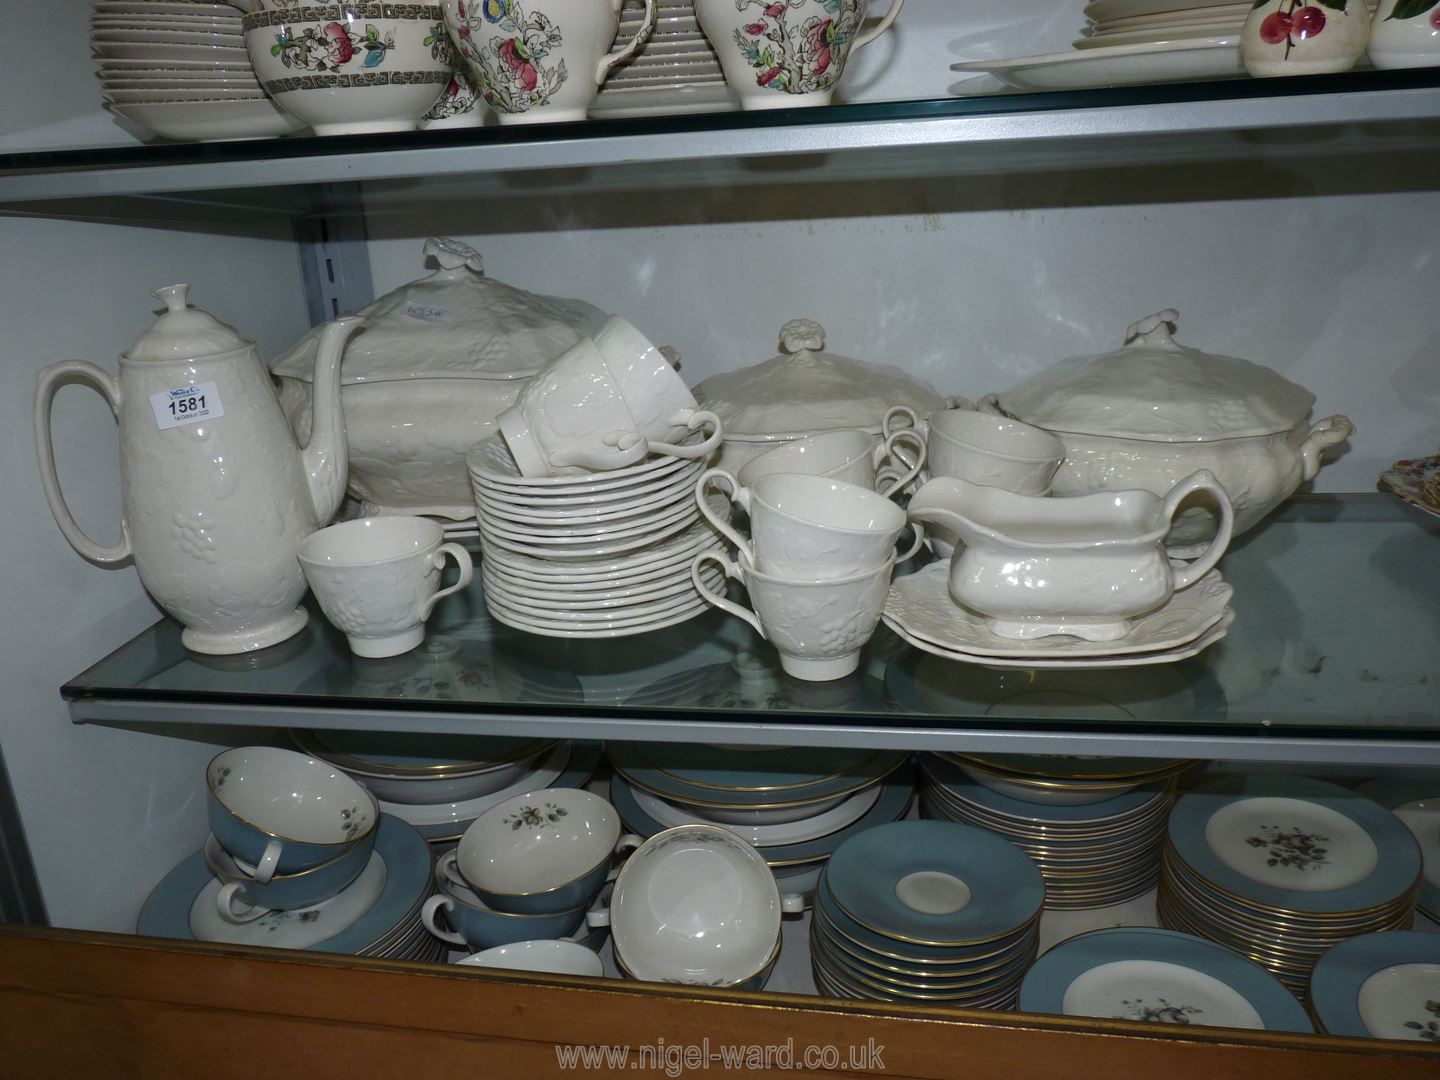 A quantity of Burleigh Staffordshire tea and dinner ware in cream with embossed fruits and vines